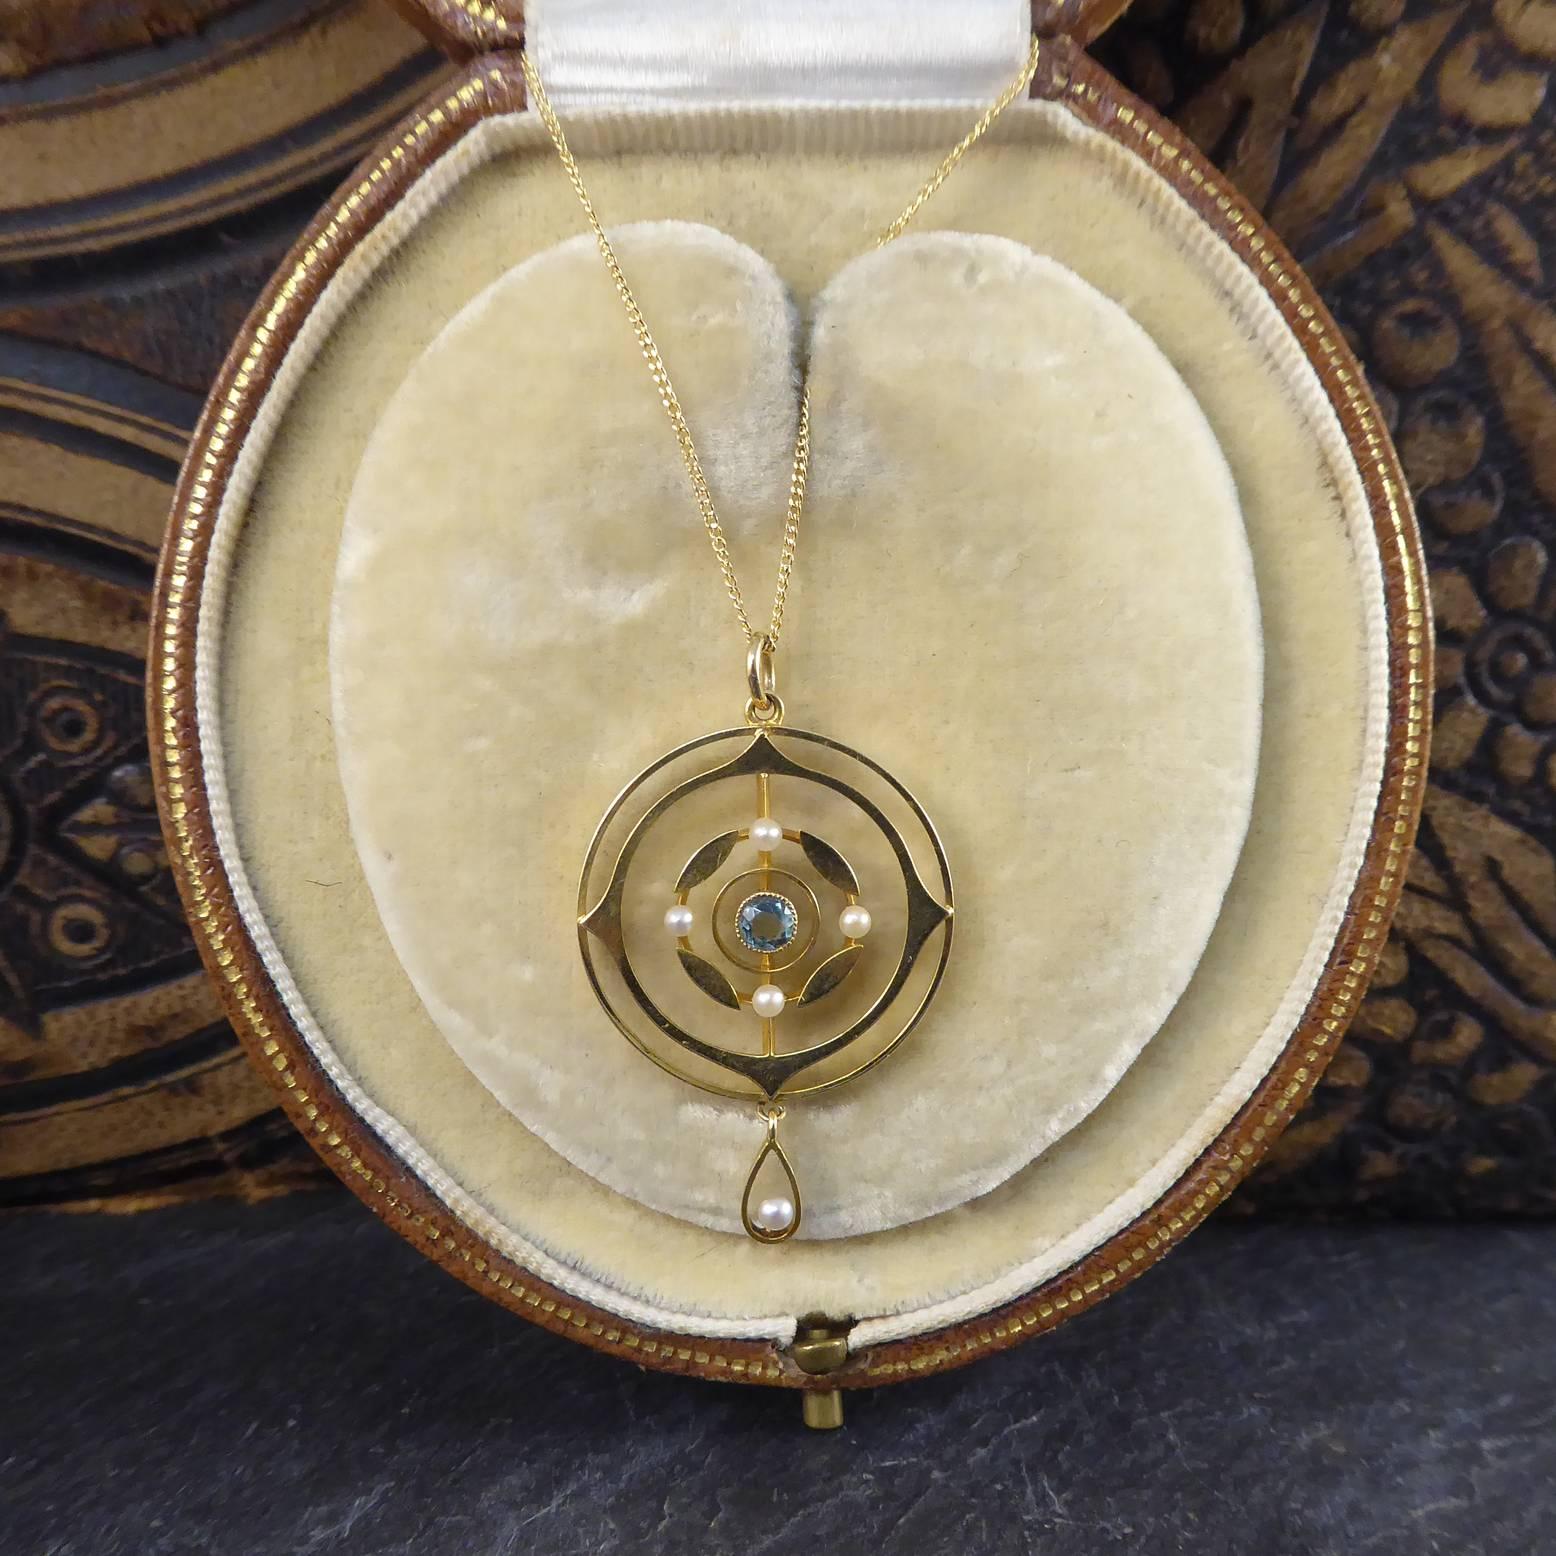 Created in the early Edwardian era this antique art nouveau pendant is set to the centre with a round aquamarine within a gold circle.  Four marquise shaped gold sections interspersed with a seed pearl enhance the aquamarine and the whole